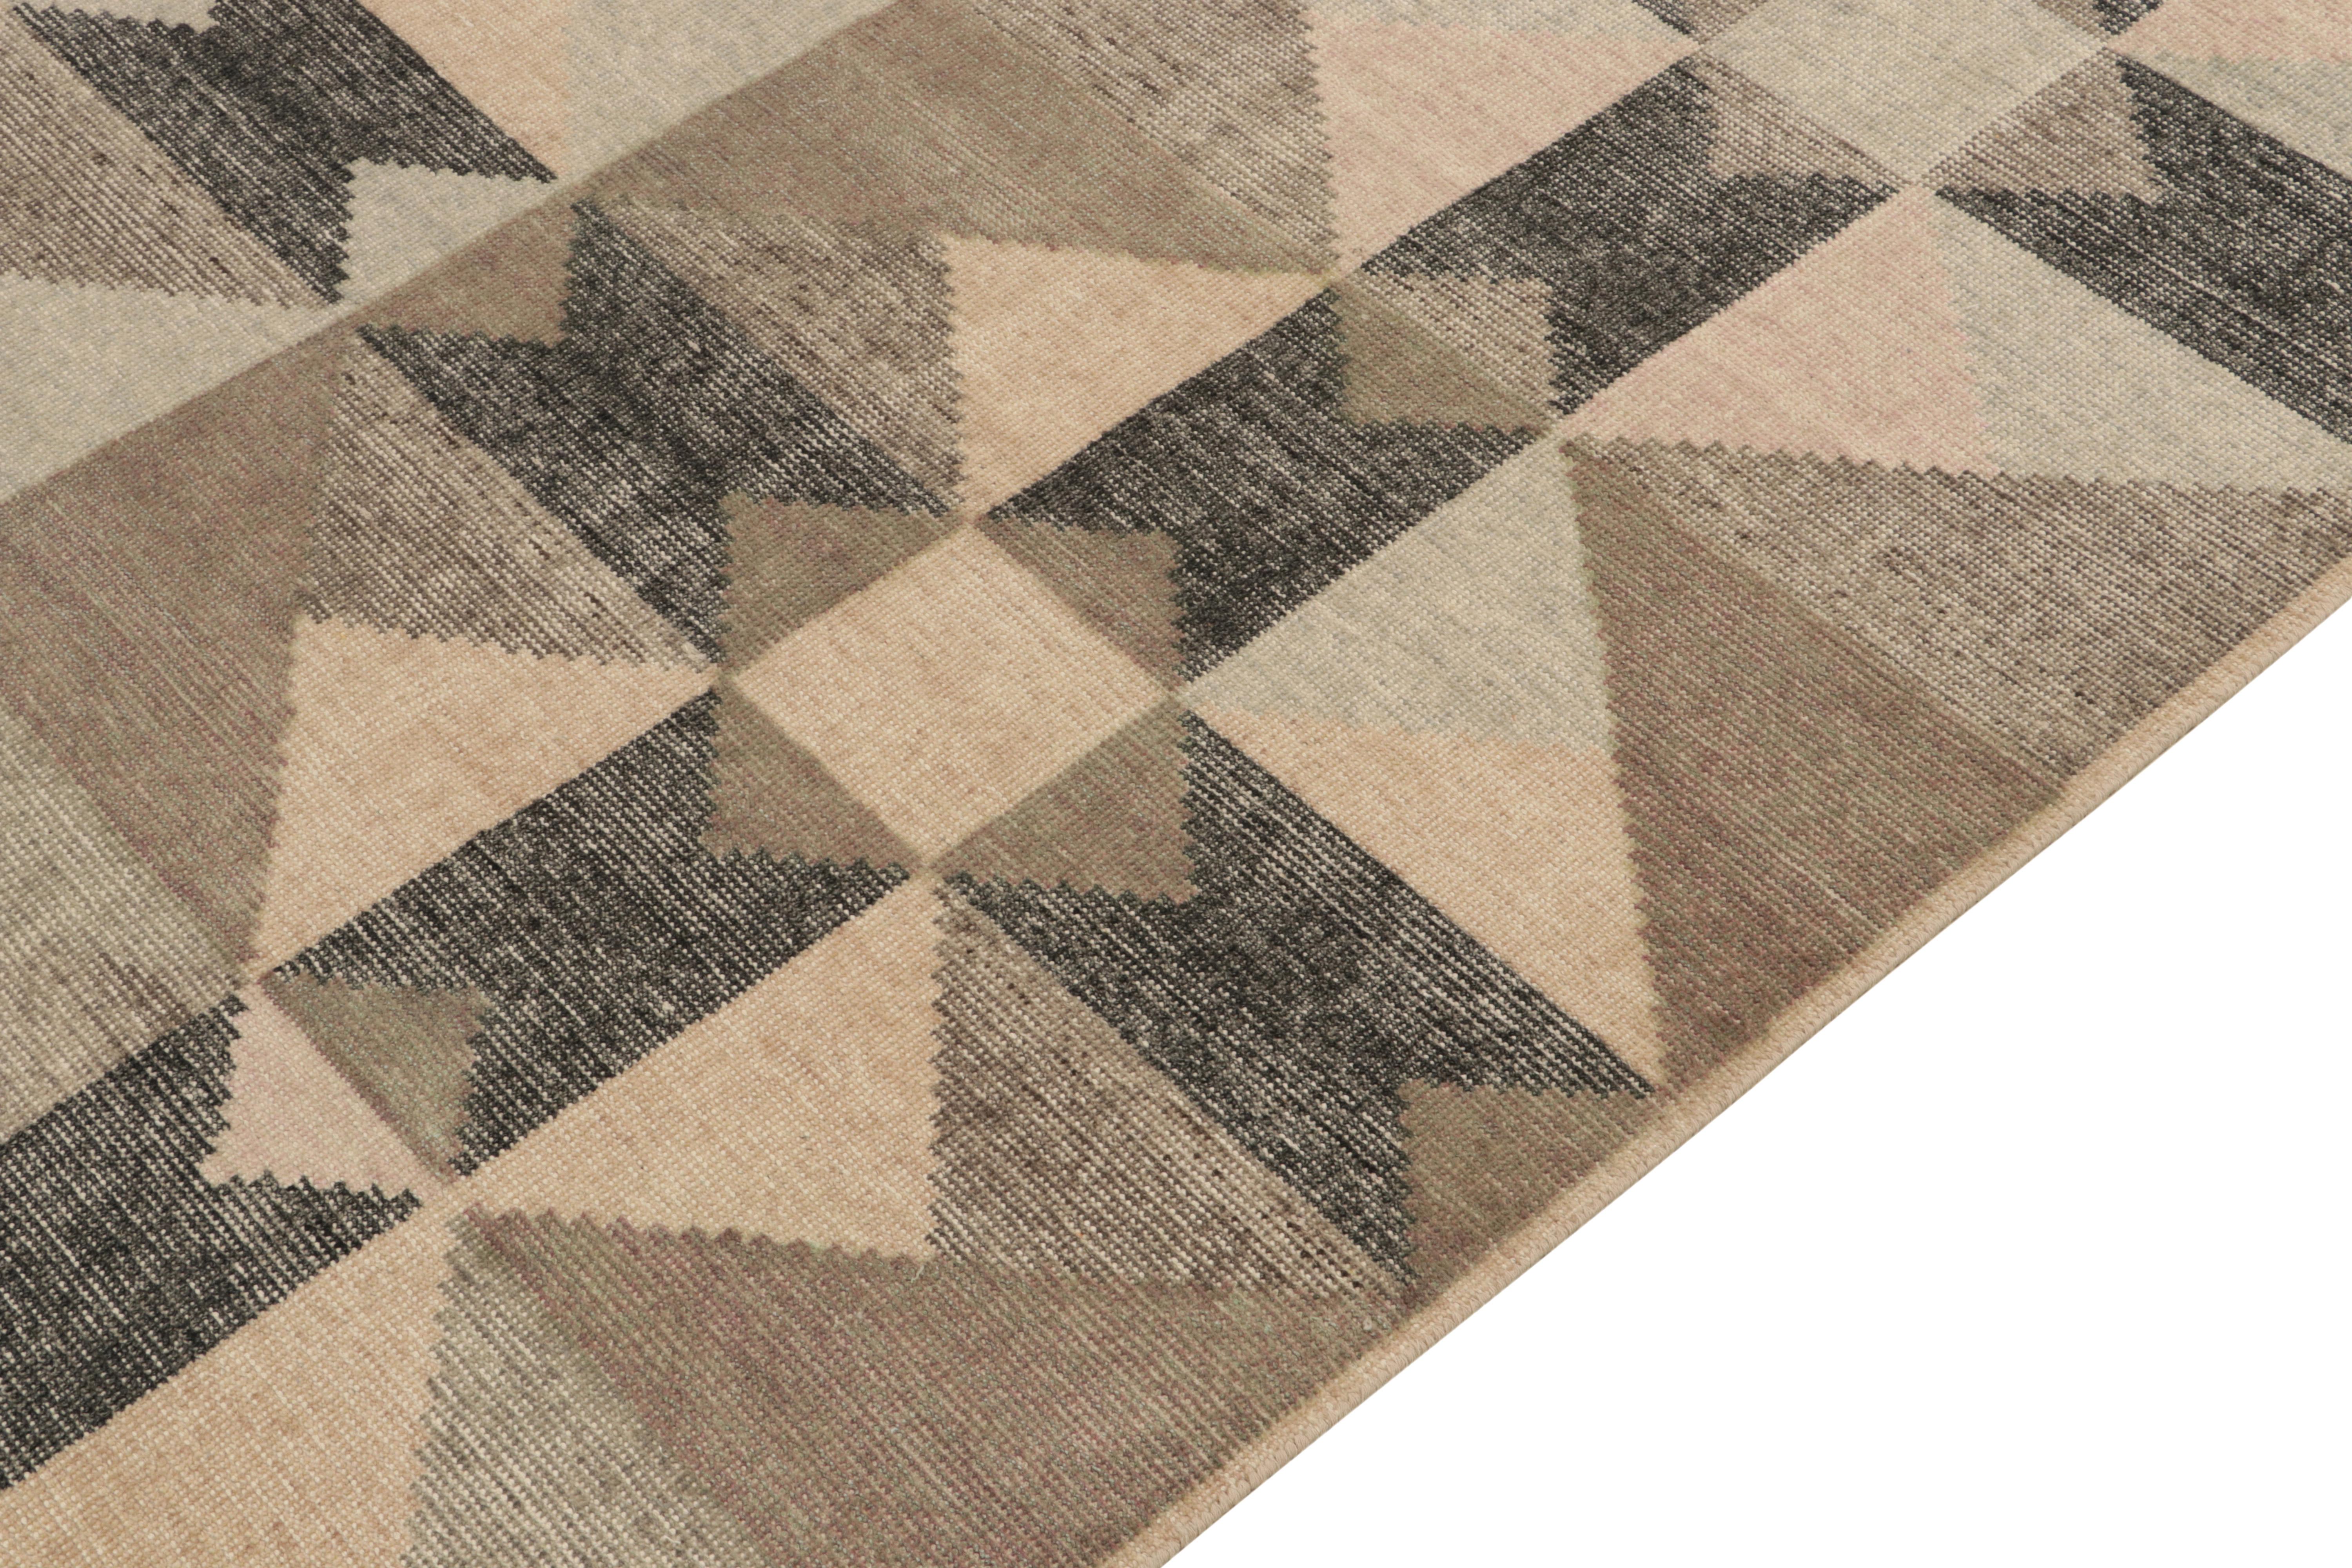 Hand-Knotted Rug & Kilim's Distressed Style Deco Rug in Beige-Brown, Black Geometric Pattern For Sale